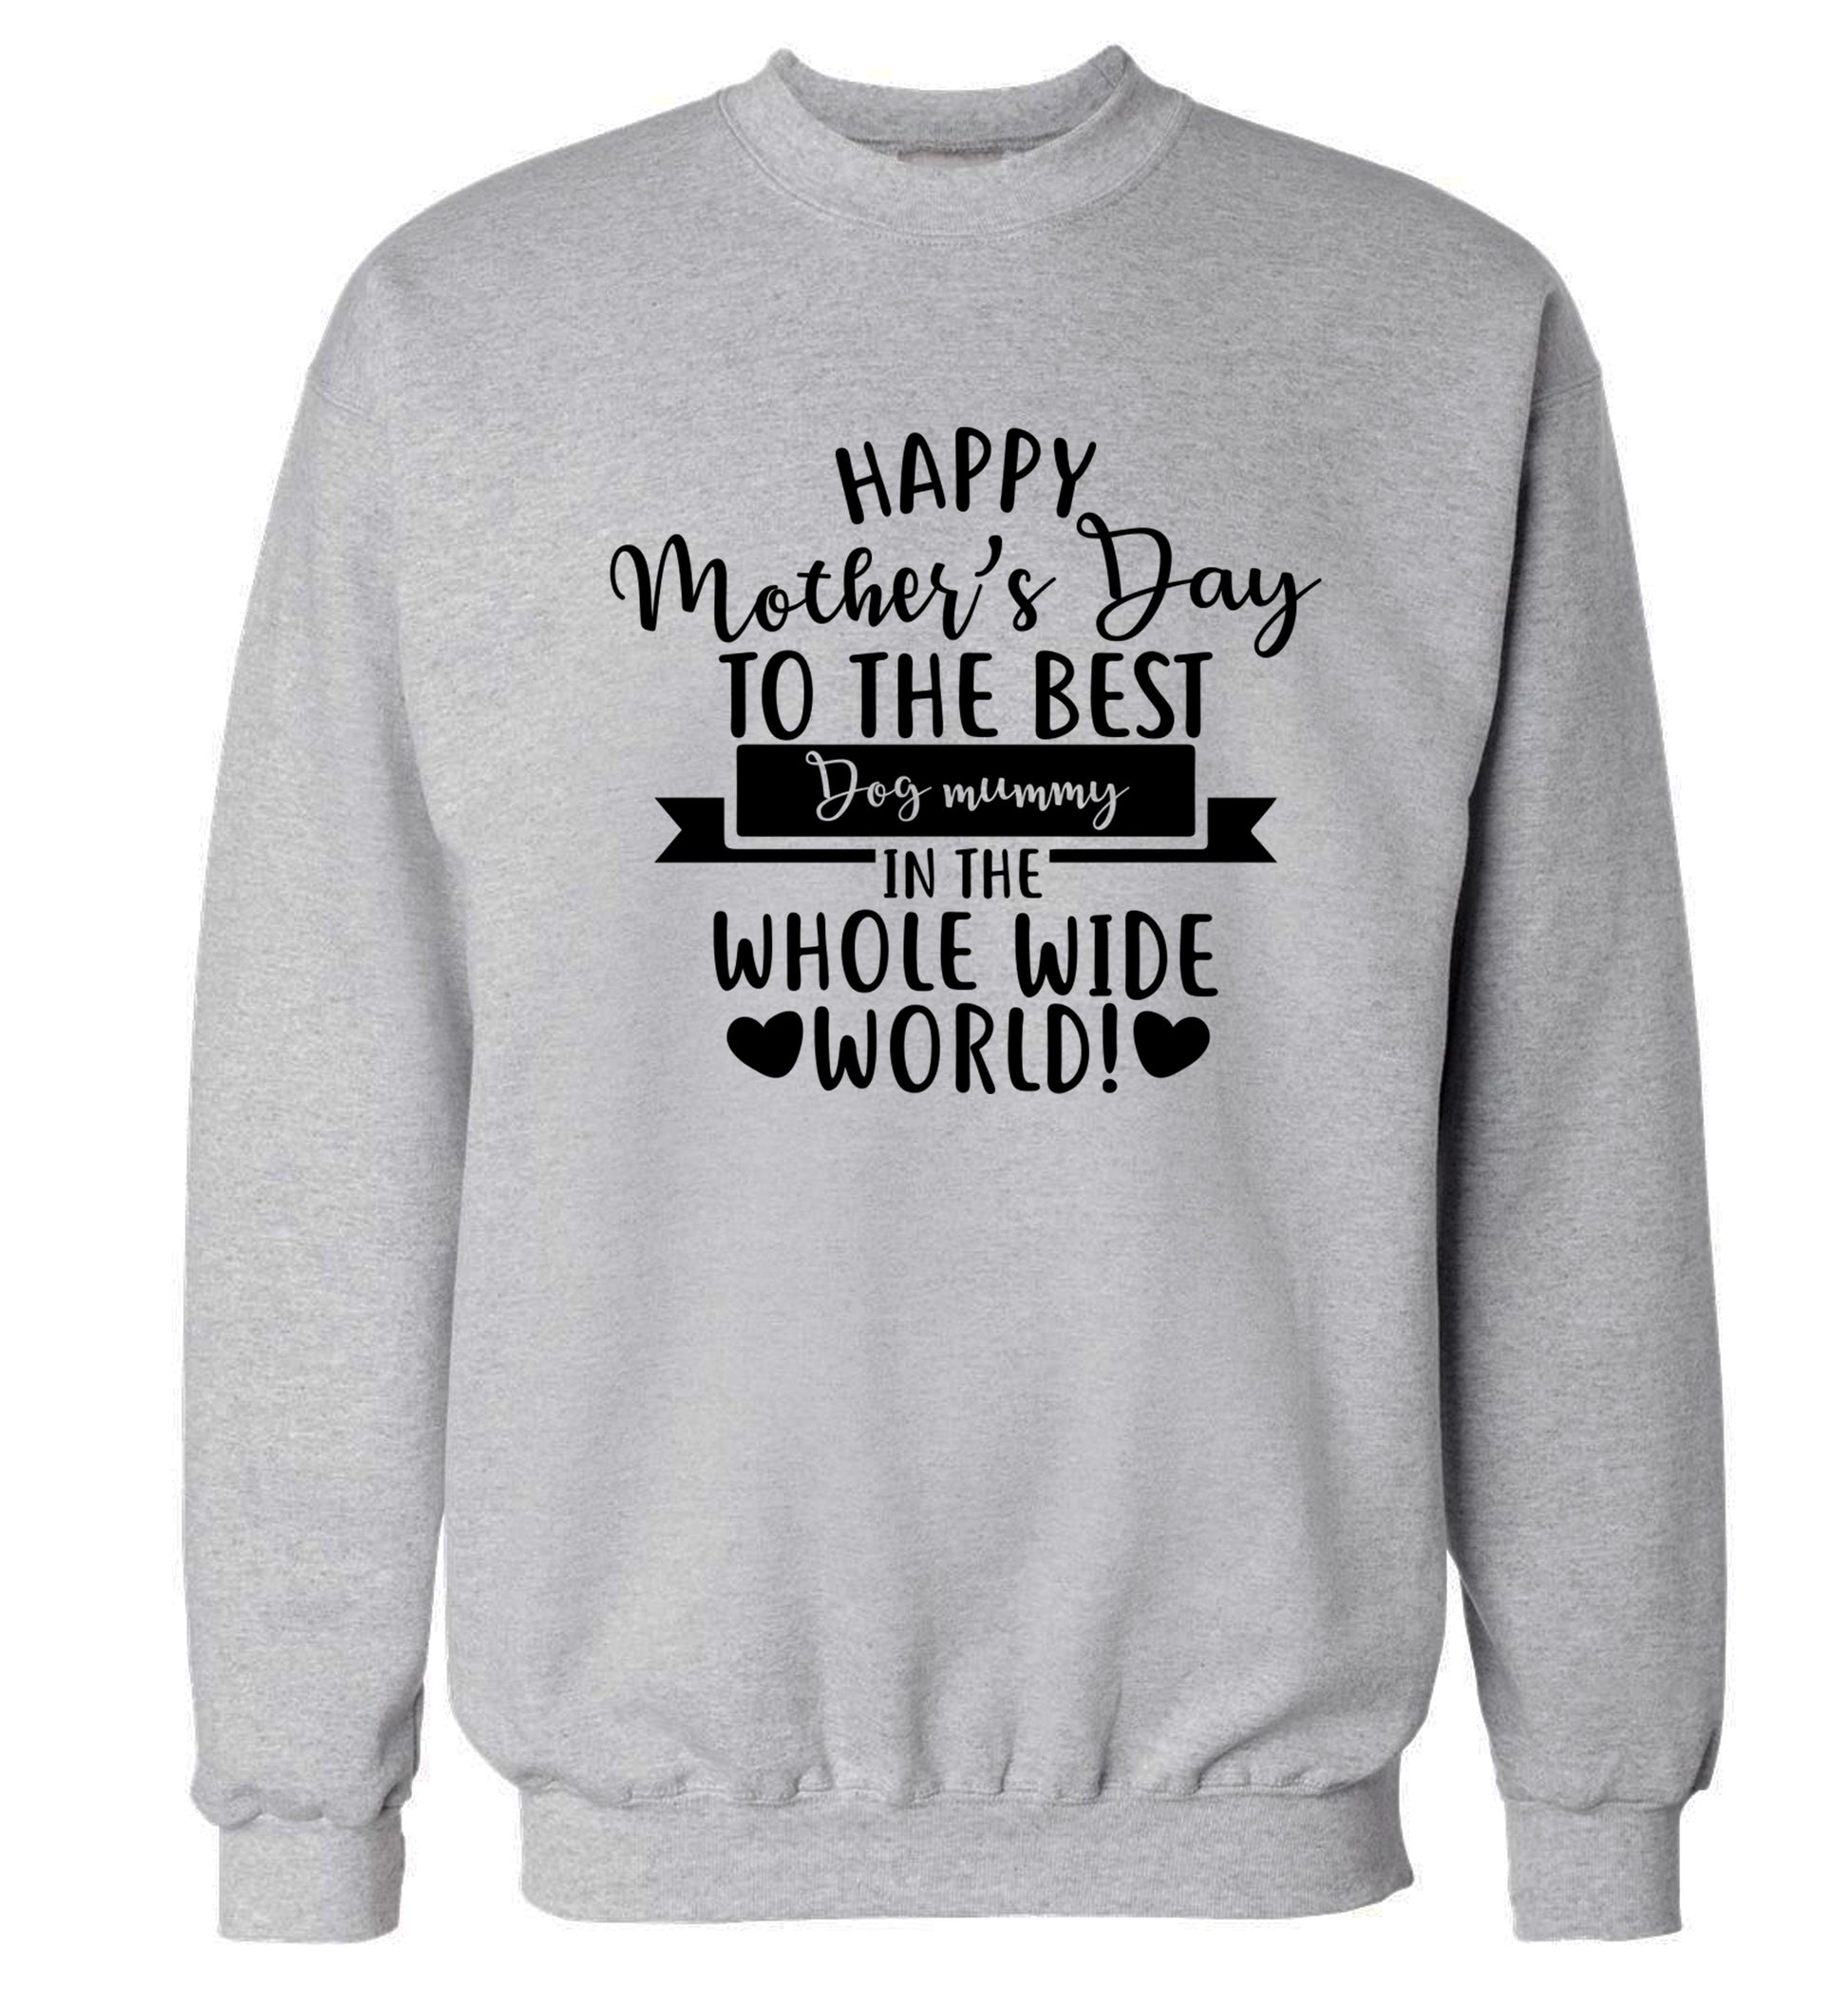 Happy mother's day to the best dog mummy in the world Adult's unisex grey Sweater 2XL